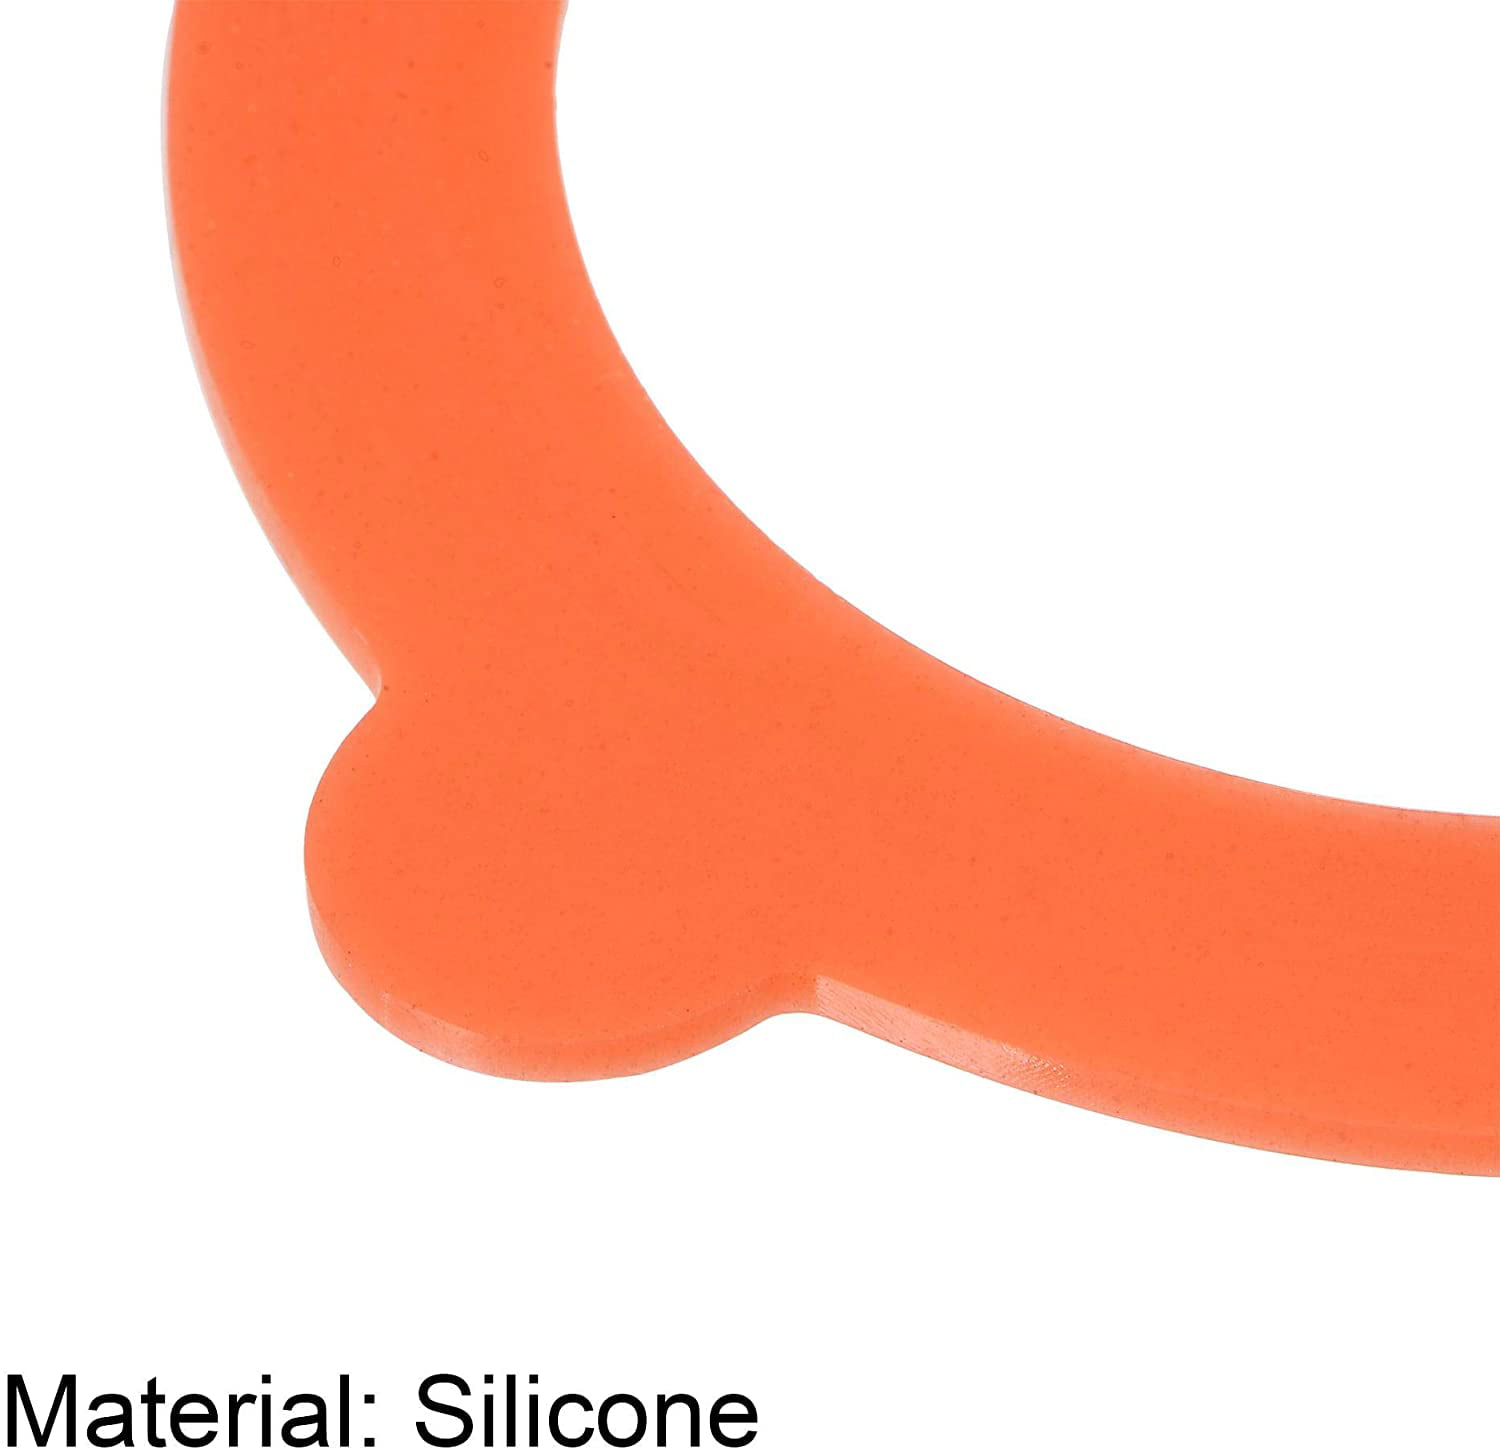 97mm OD 70mm ID 2mm Thickness Airtight Sealing Rings Replacement for Regular Mouth Can sourcing map Silicone Jar Gaskets Pack of 6 Orange